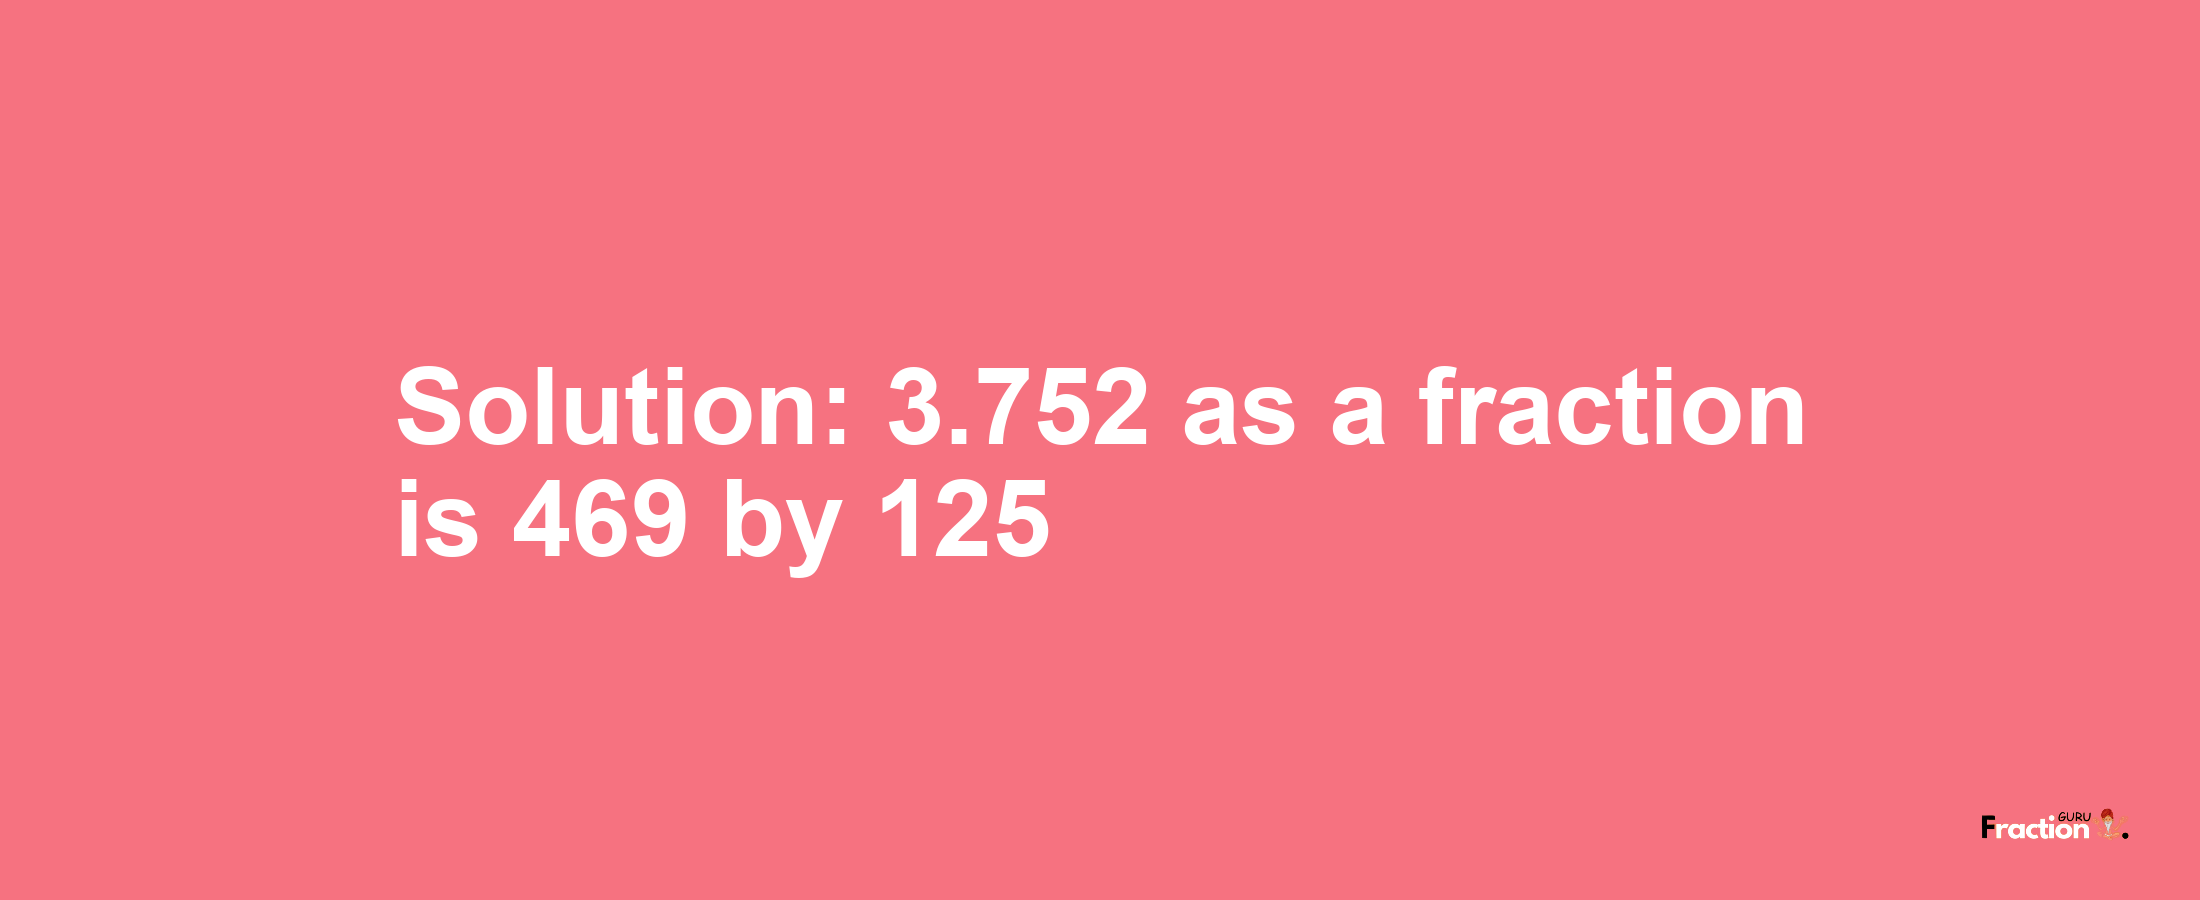 Solution:3.752 as a fraction is 469/125